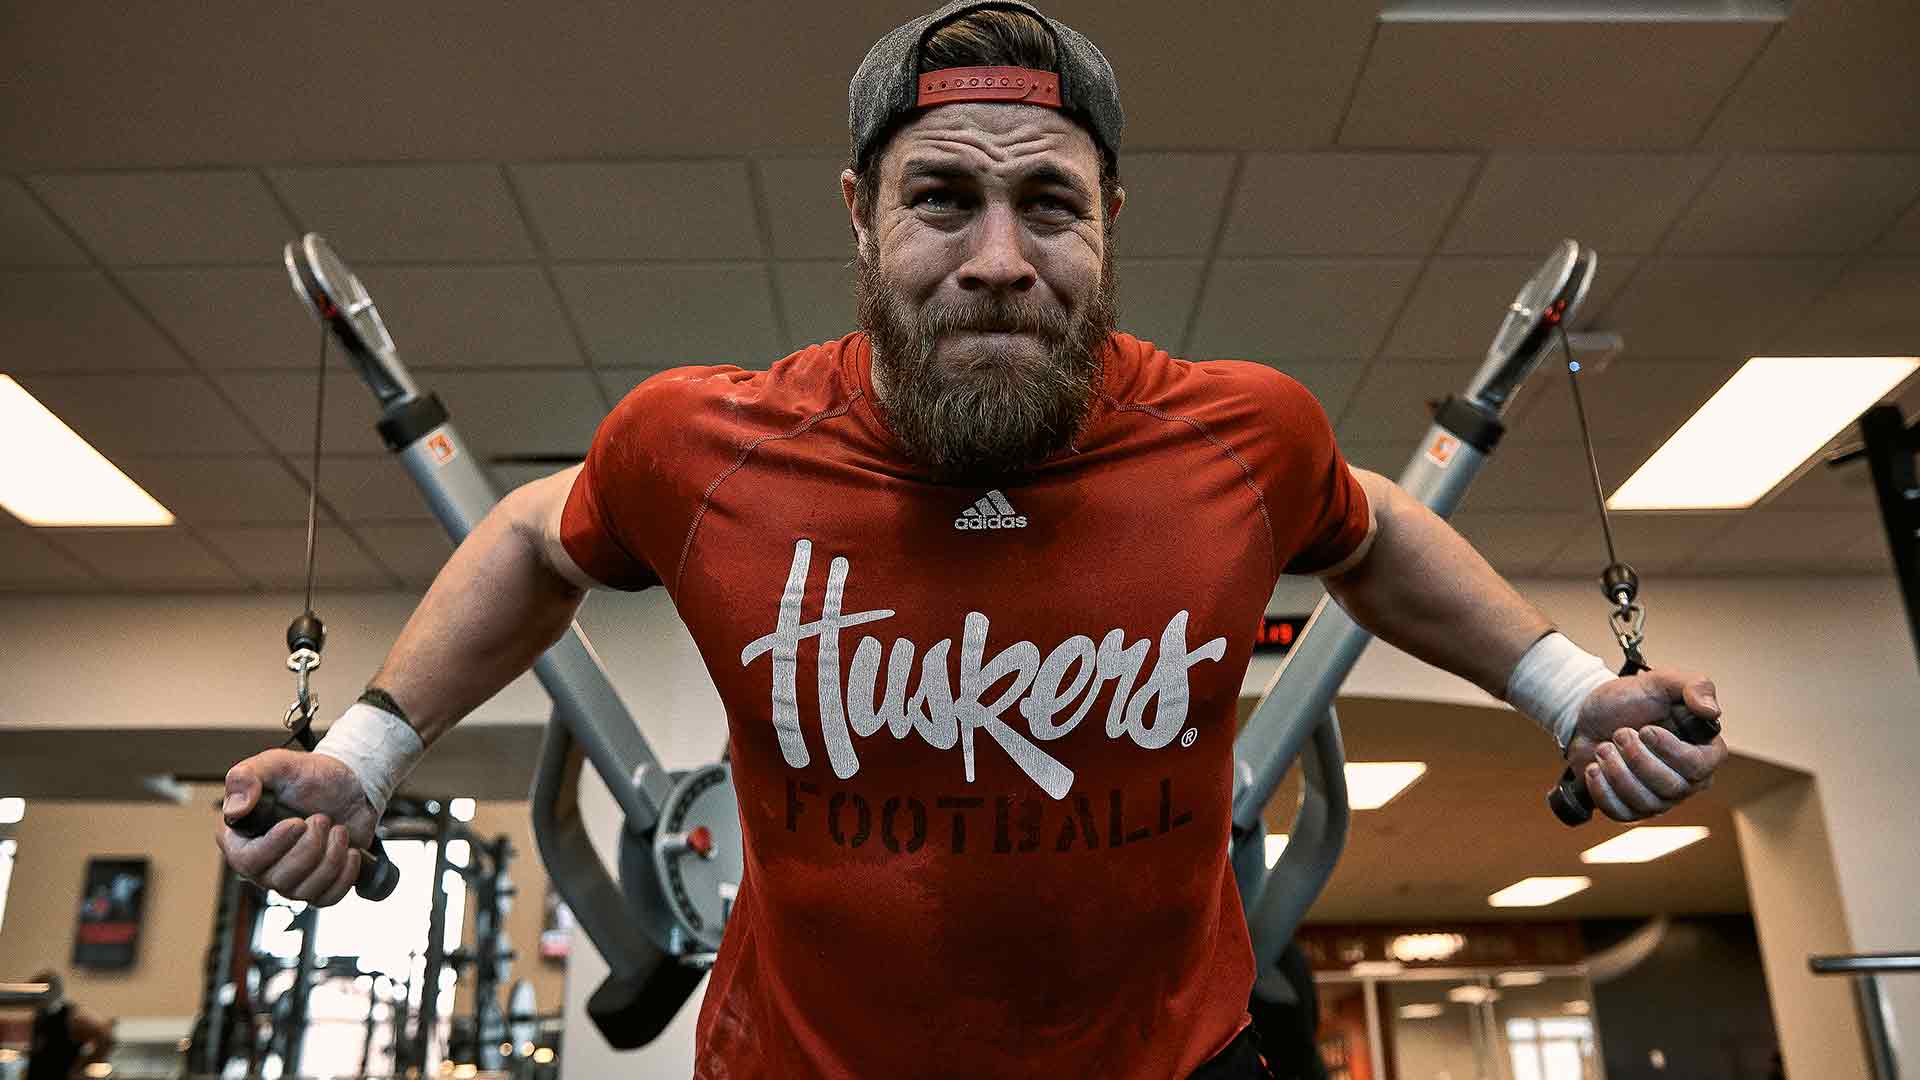 Damian Jackson former U.S. Navy Seal and current football player for the Nebraska Cornhuskers, spends time exercising in the weight room